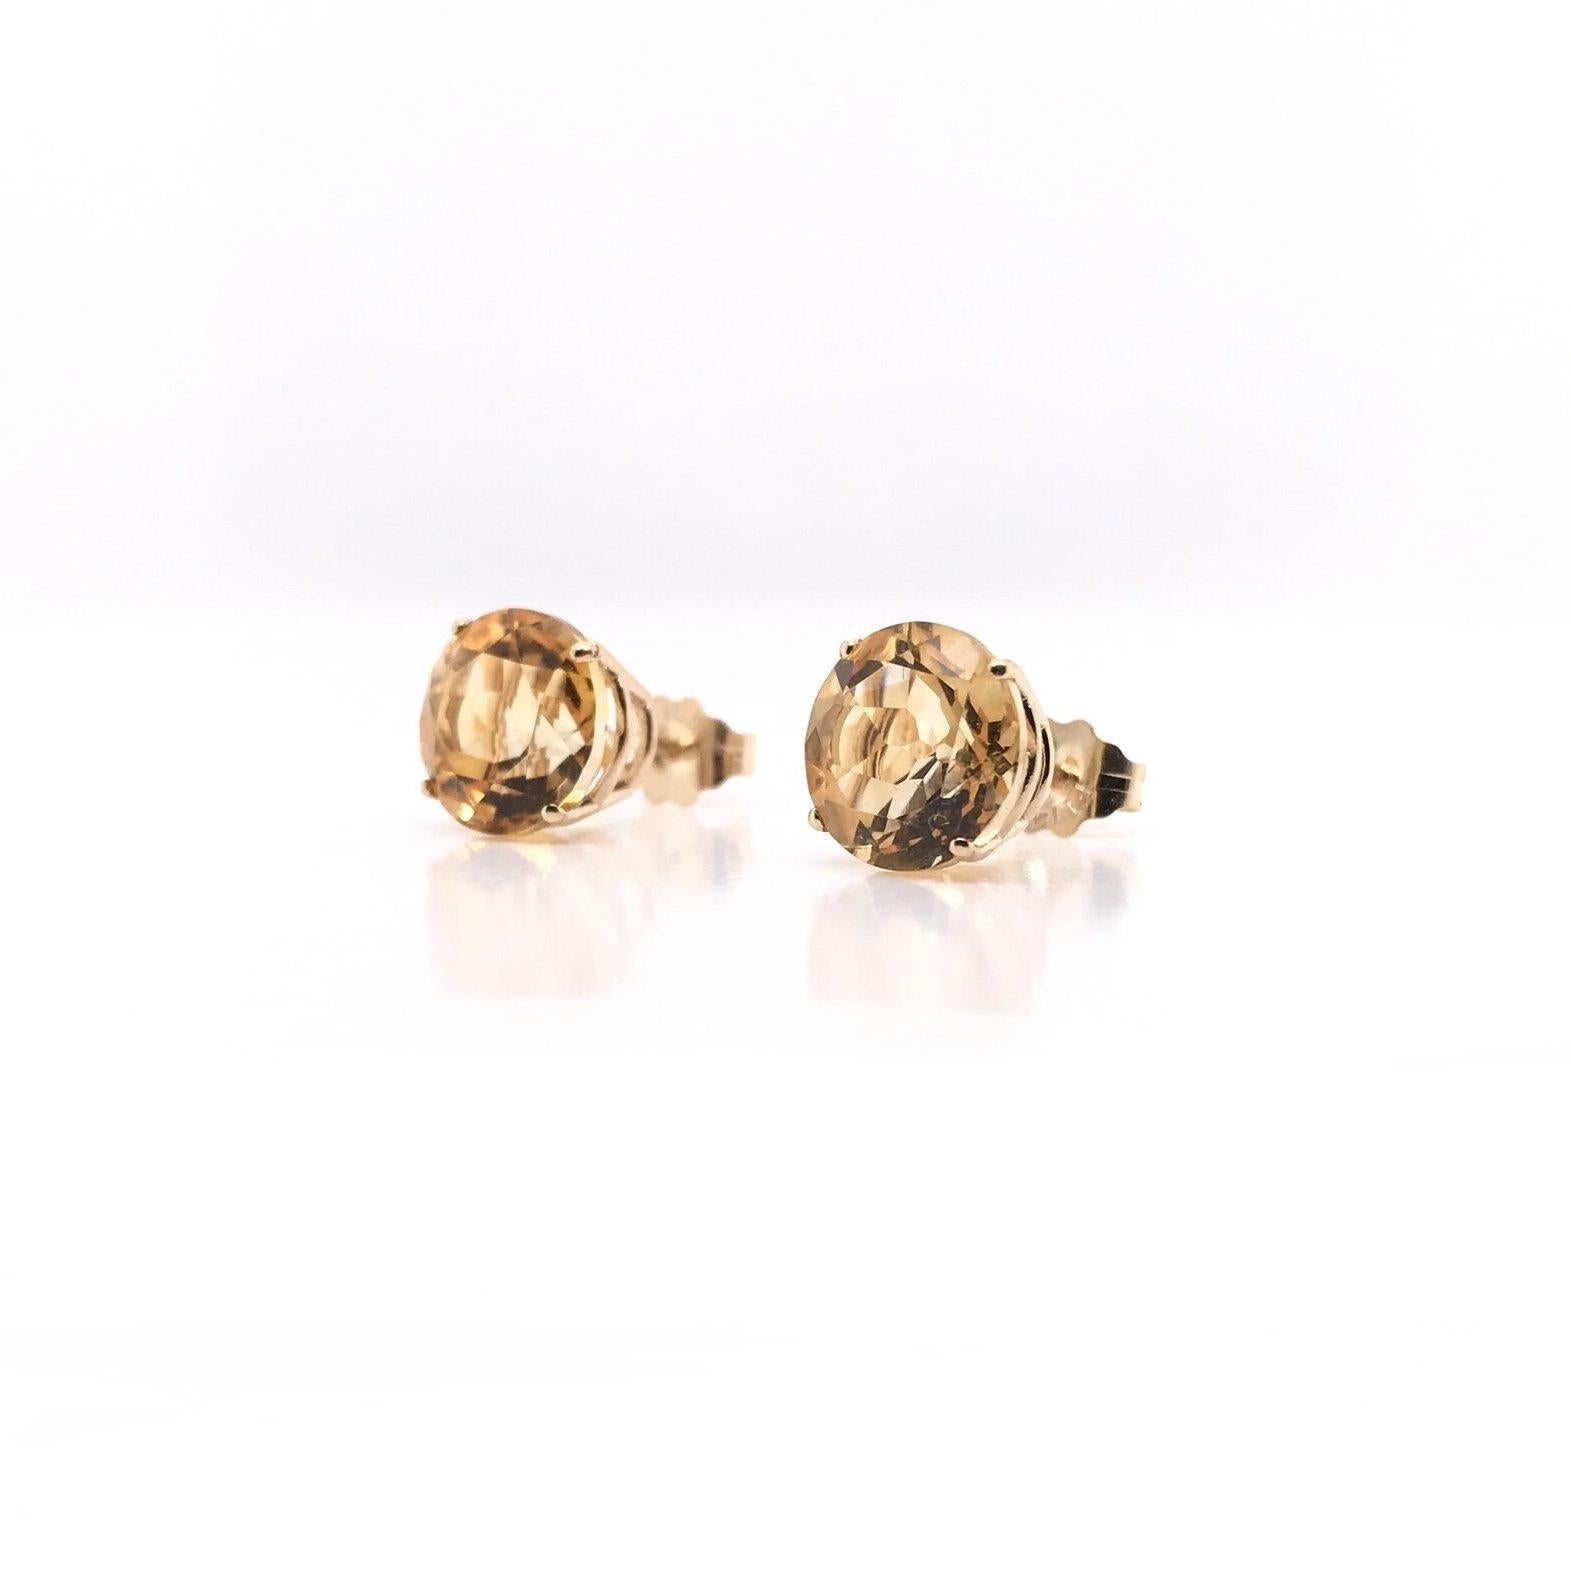 These beautiful citrine earrings are a contemporary estate piece. The simple settings are 14k gold and incredibly minimal; the gorgeous stones are the center of attention! These lightly hued citrines are fancy cut for maximum sparkle. We love the